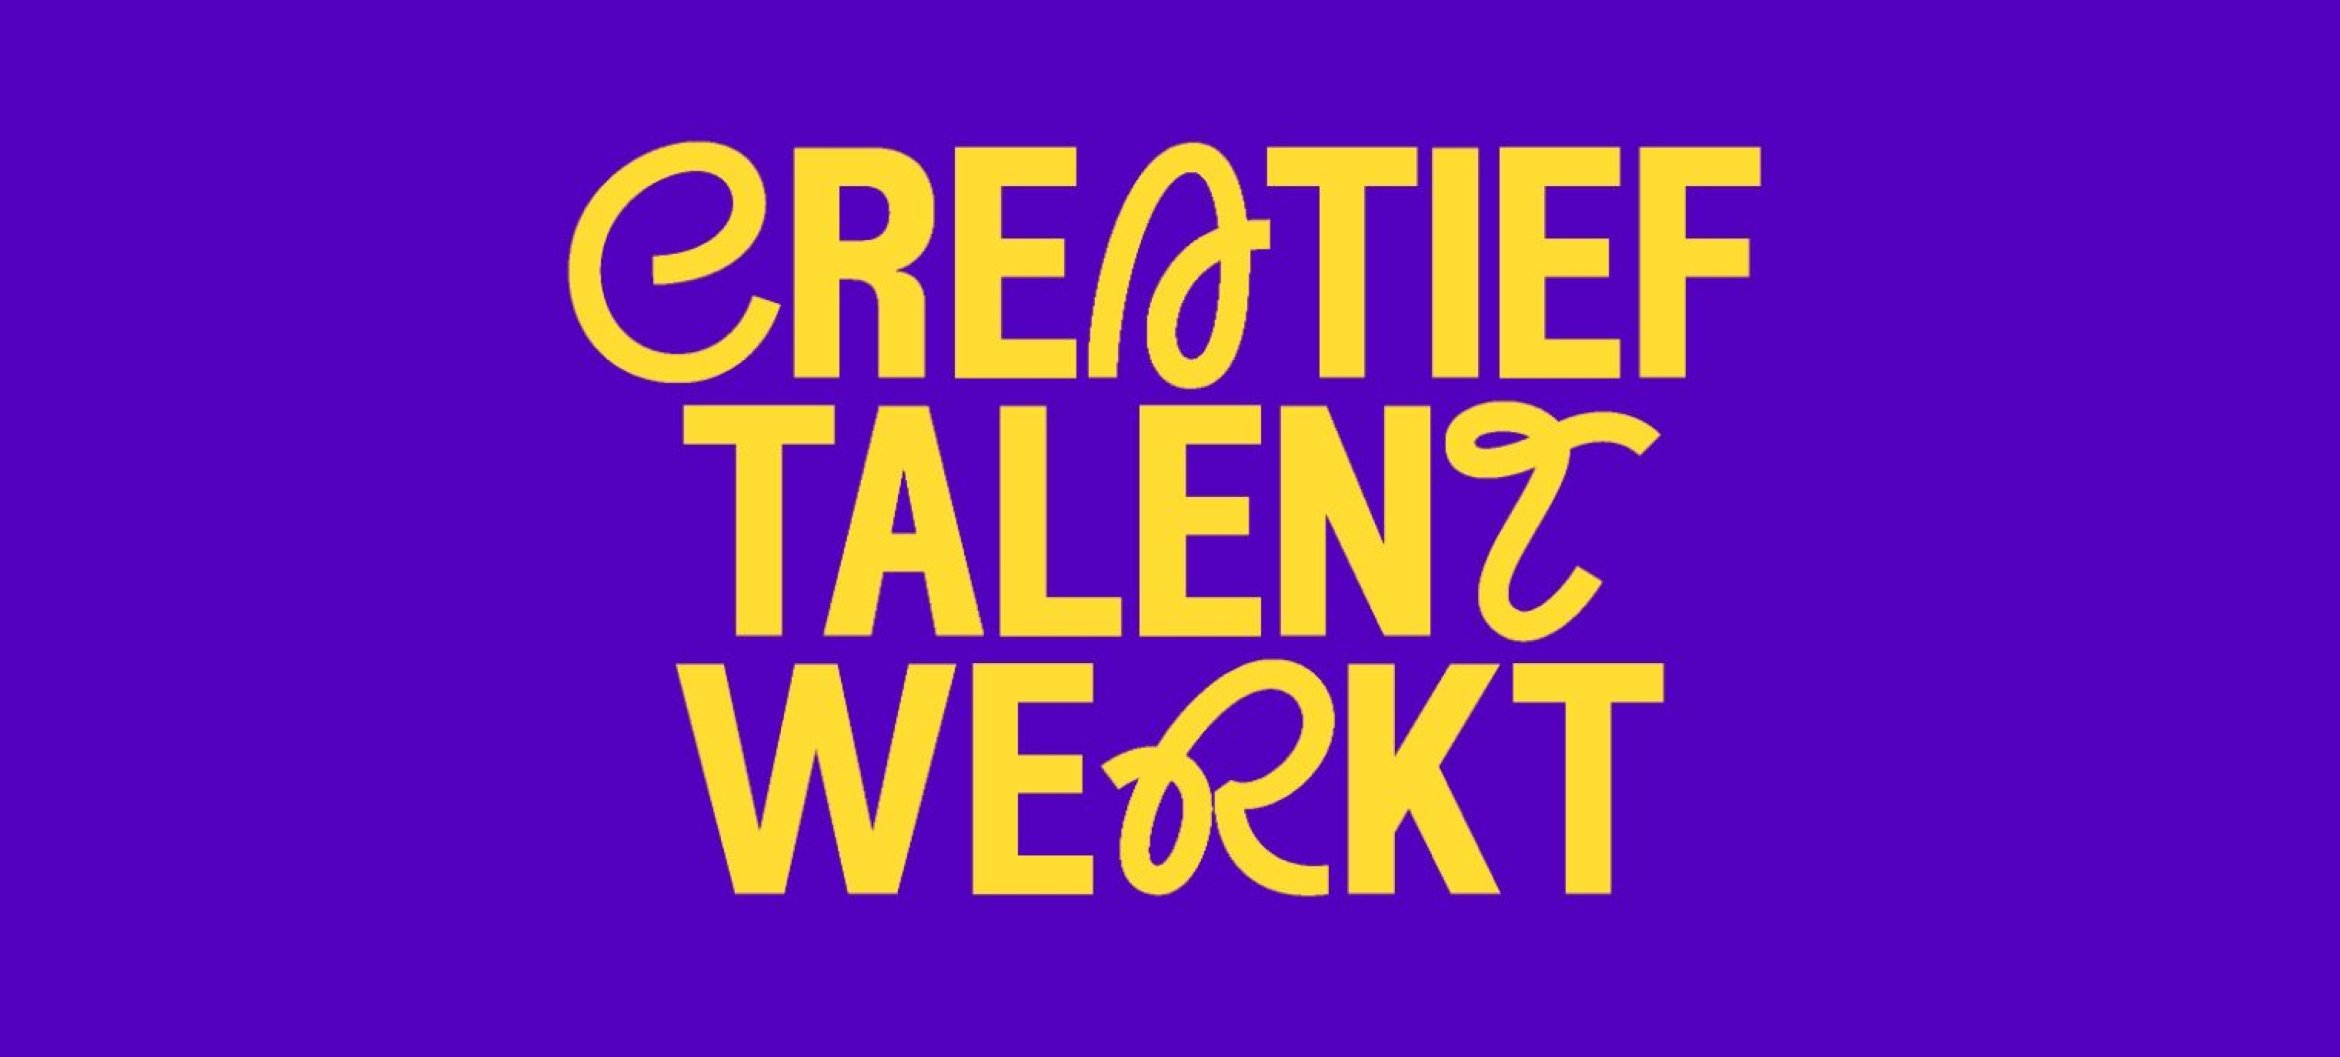 &#039;Creatief Talent Werkt&#039; is the online magazine that resulted out of this research. In this magazine